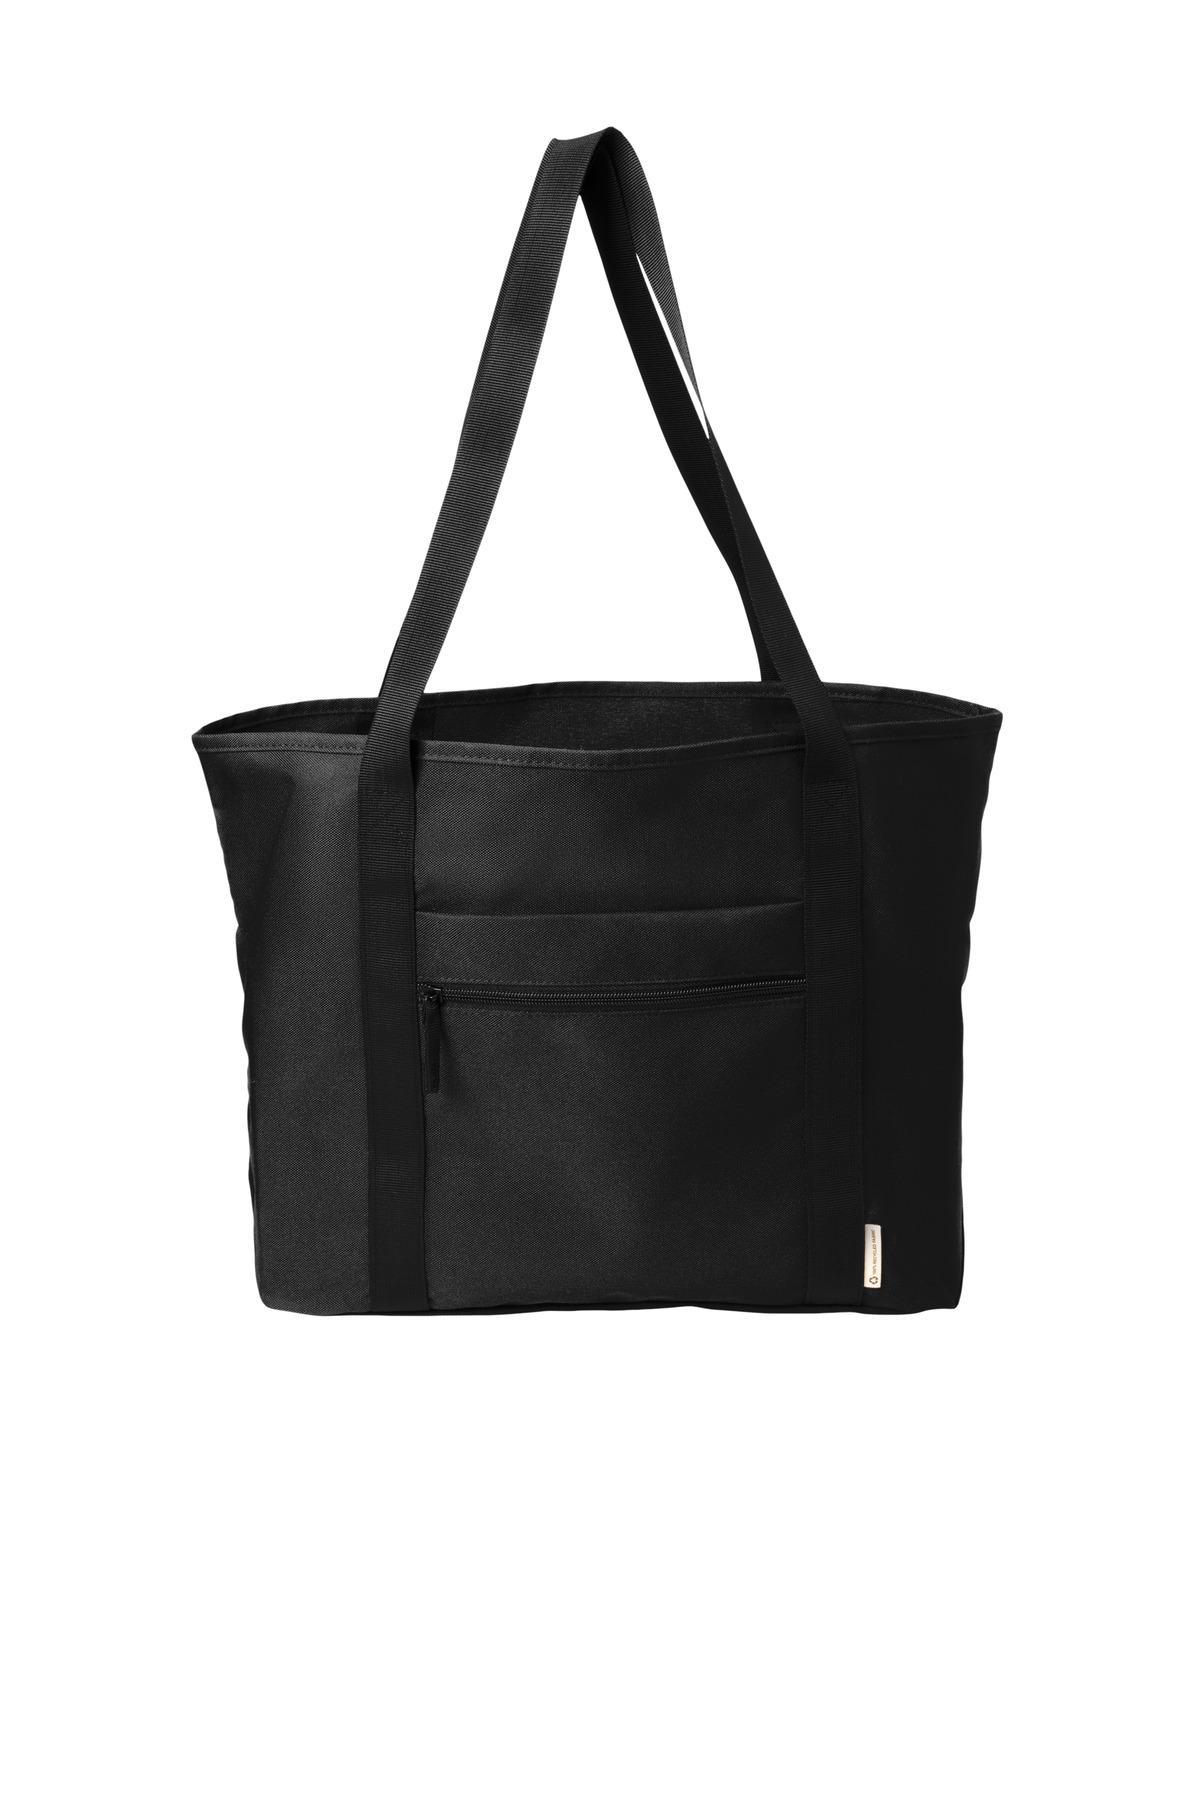 Port Authority C-FREE Recycled Tote-